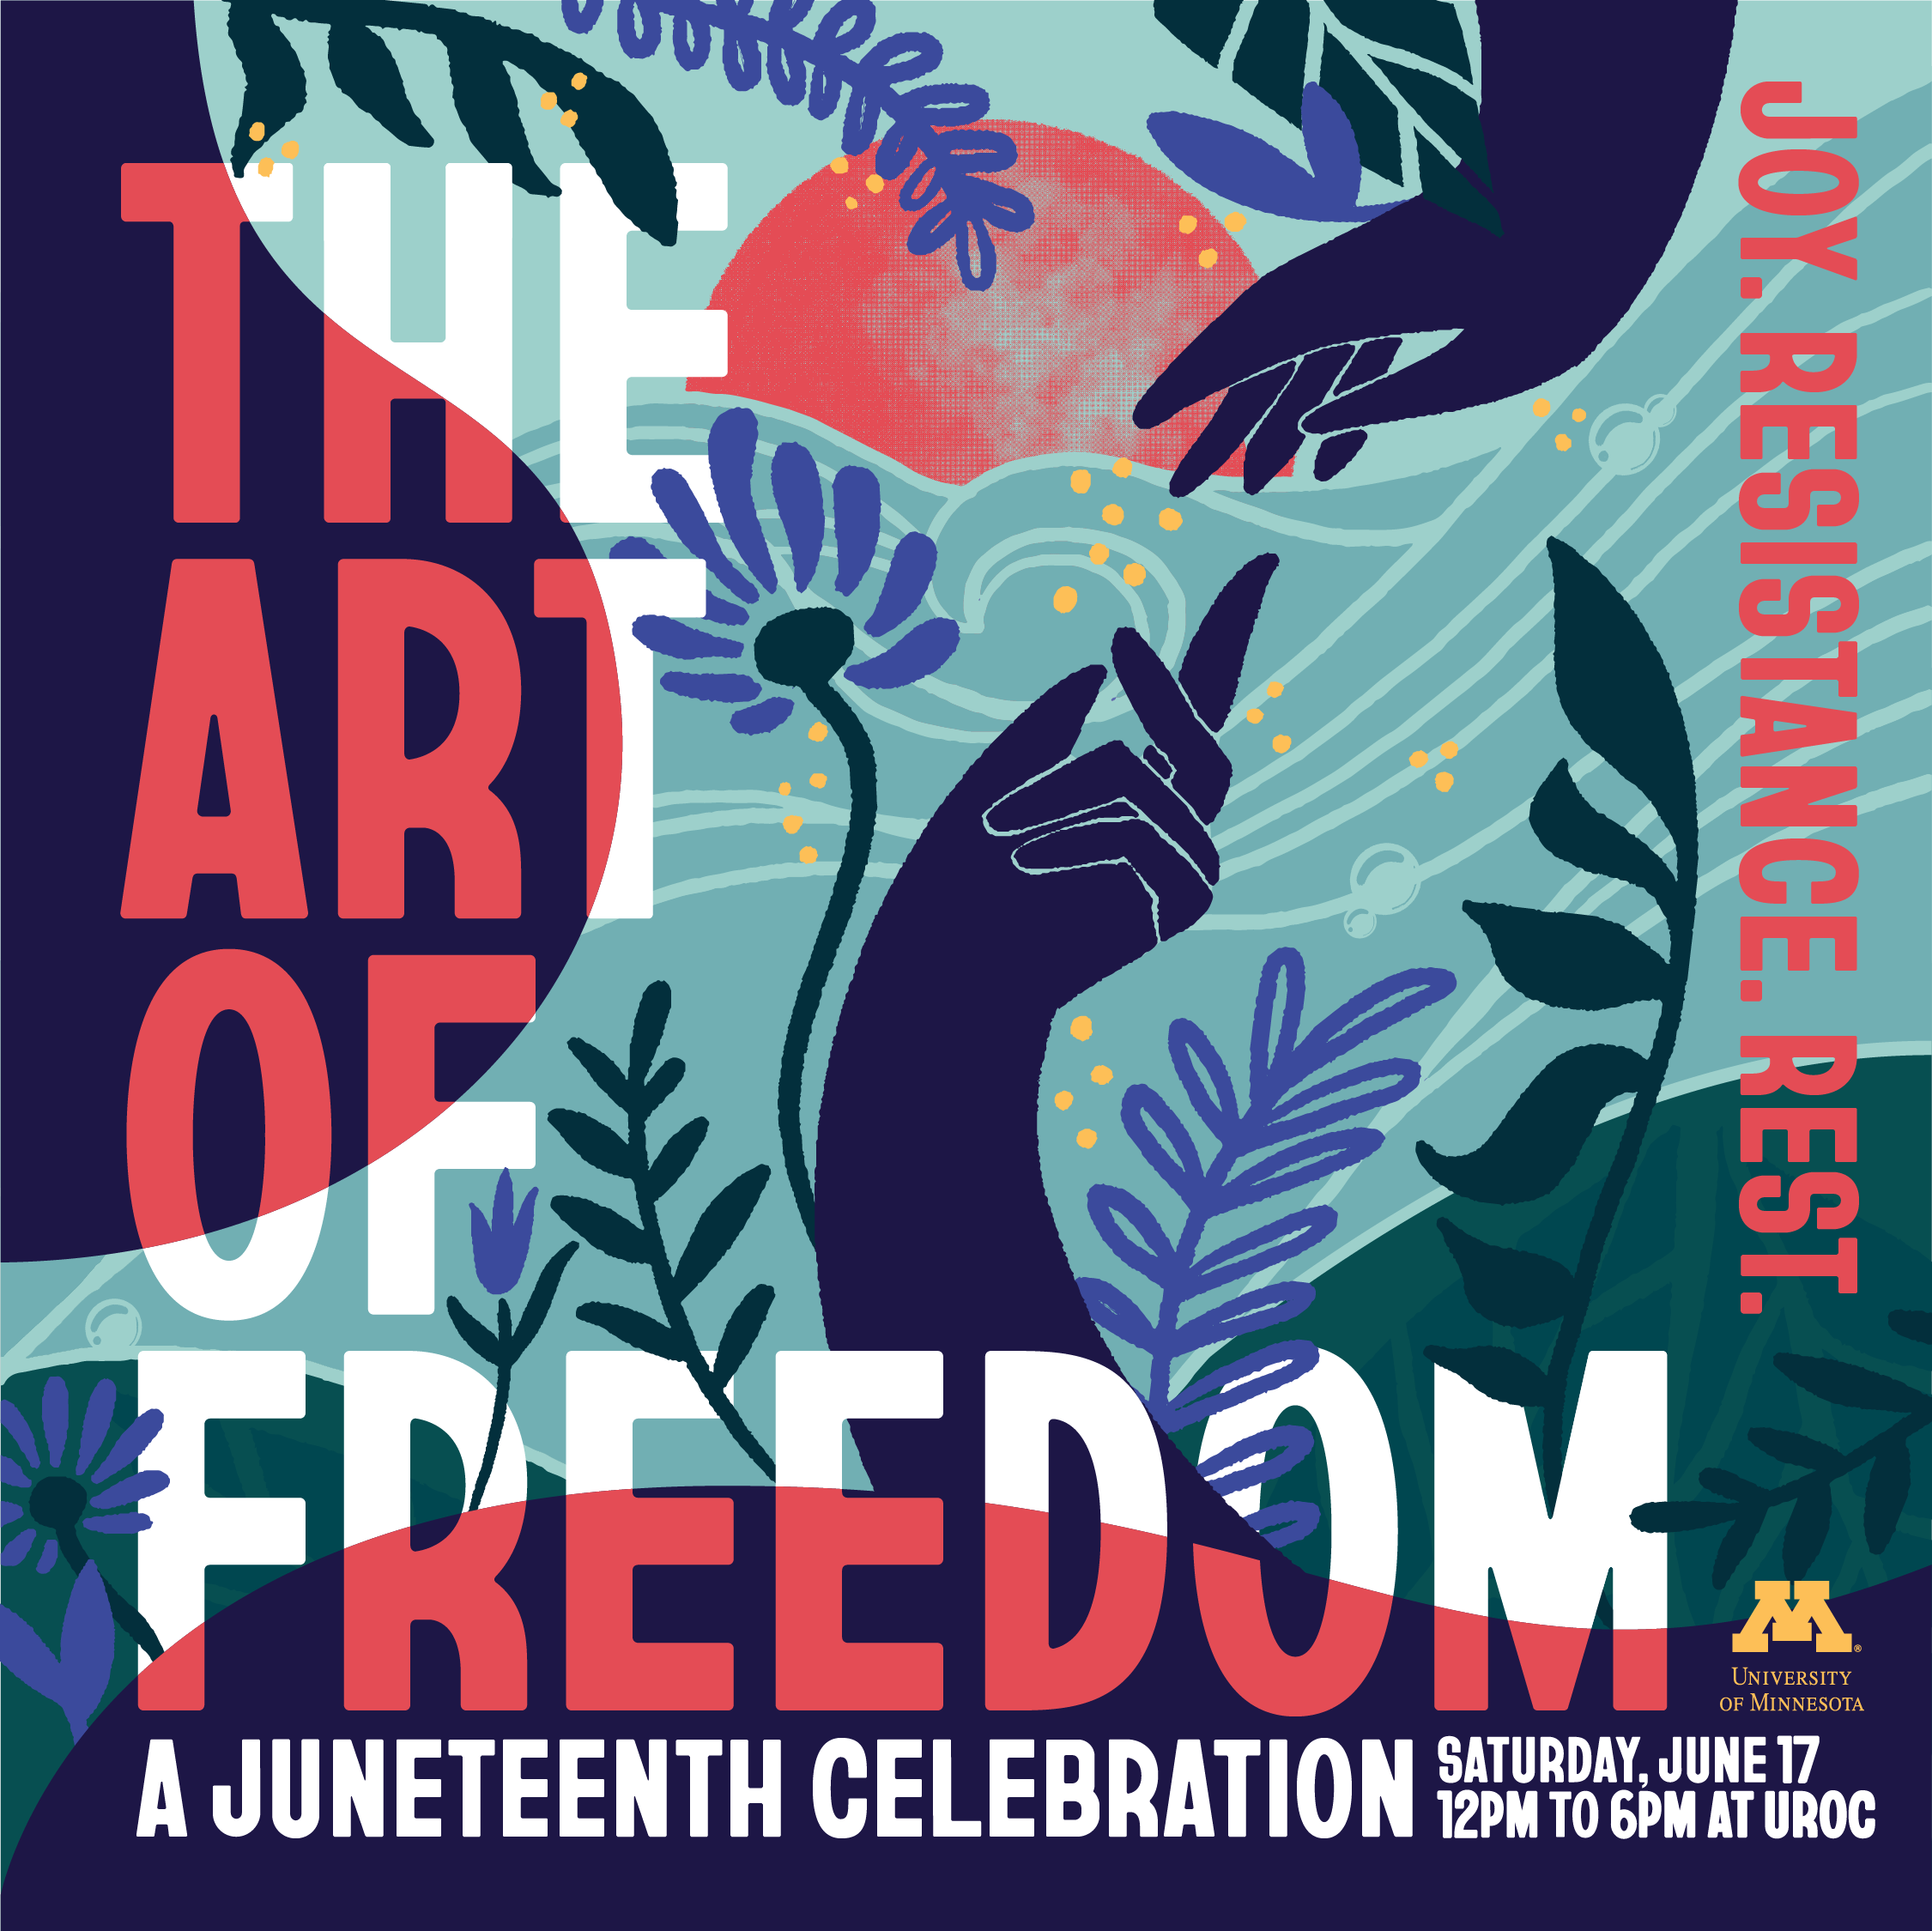 The Art of Freedom - Juneteenth